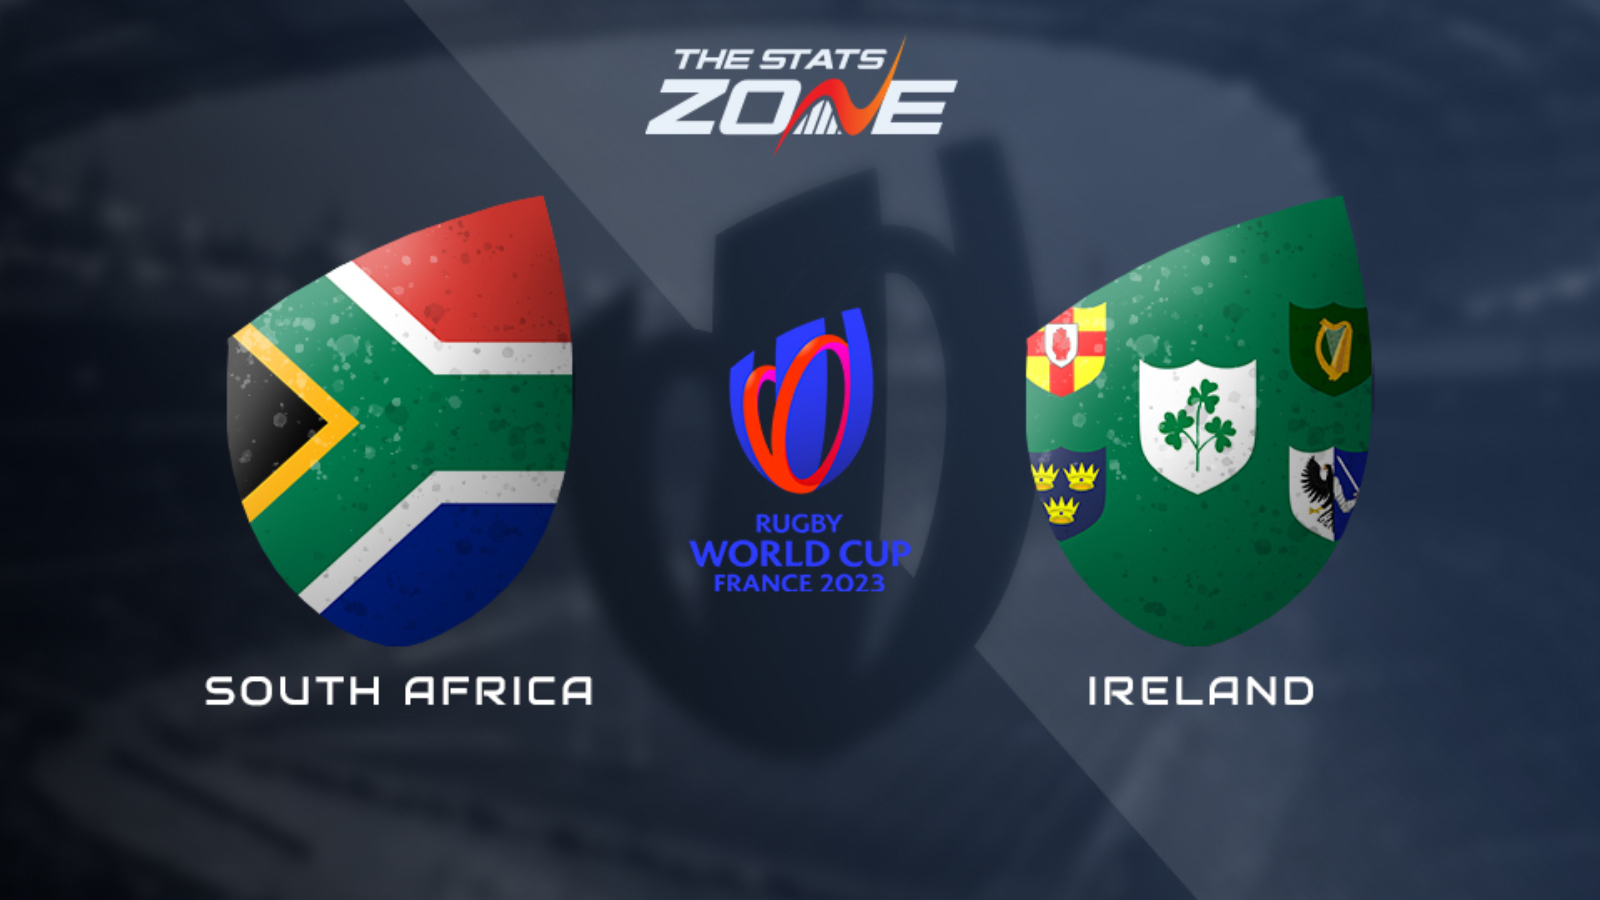 RugbyWorldCup2023 South Africa Vs Ireland 